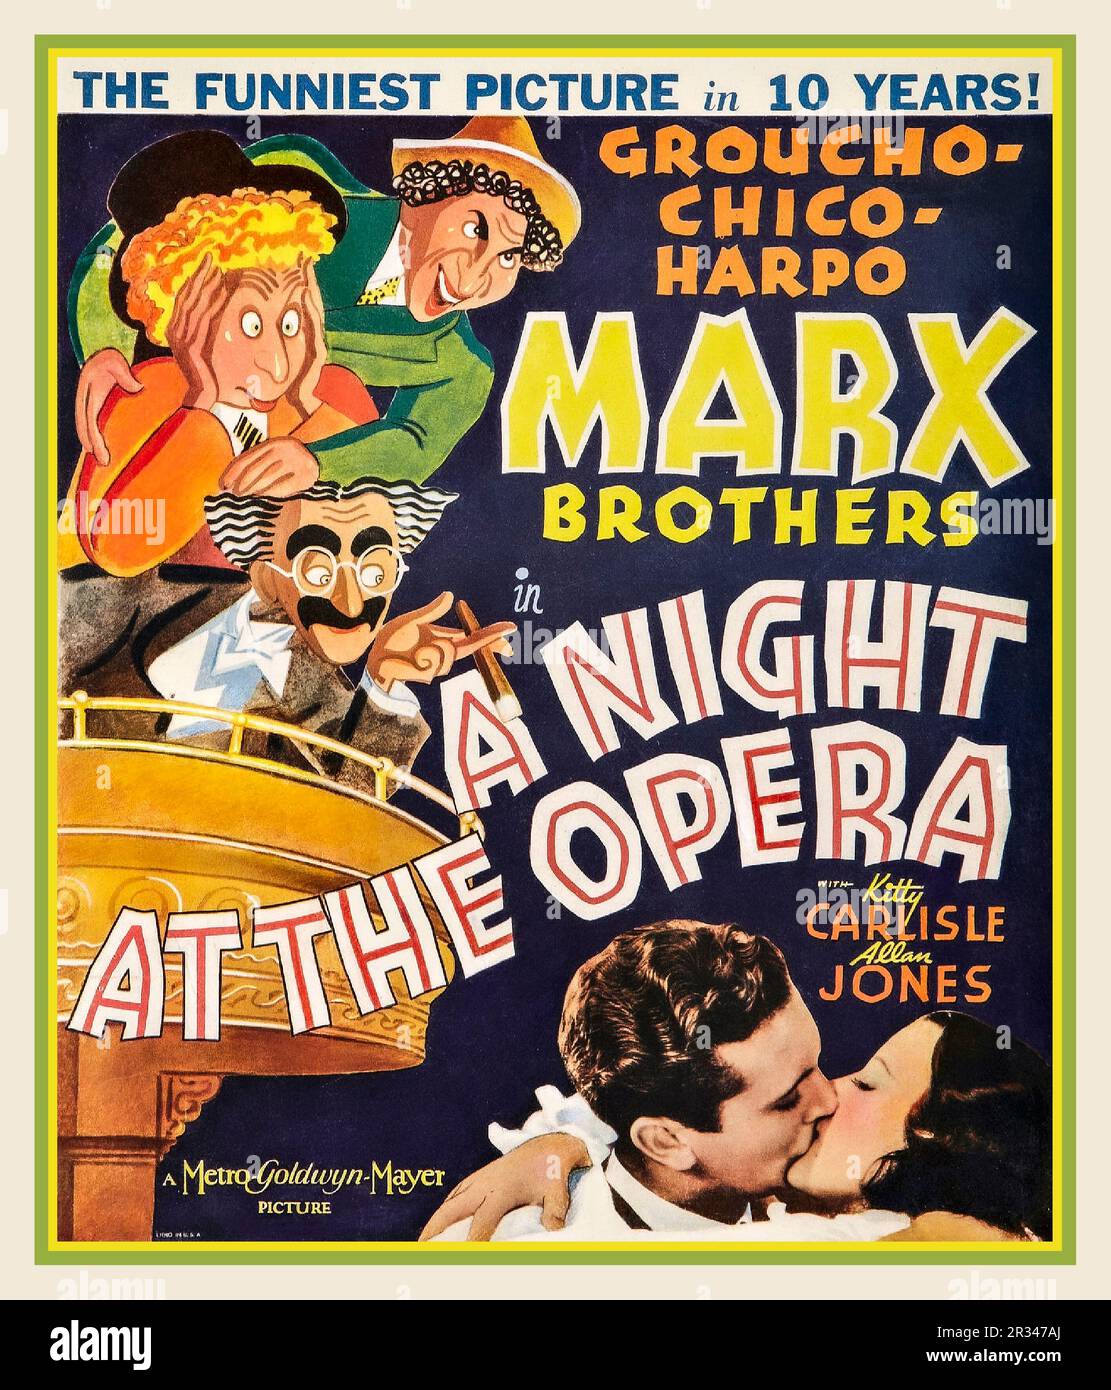 MARX BROTHERS Vintage Movie Film poster for the 1935 film A Night at the Opera. 1935 starring The Marx Brothers, GROUCHO, CHICO, HARPO. with Kitty Carlisle Allen Jones  Illustrated by Al Hirschfeld. Distributed by MGM.Pictures Hollywood USA Stock Photo